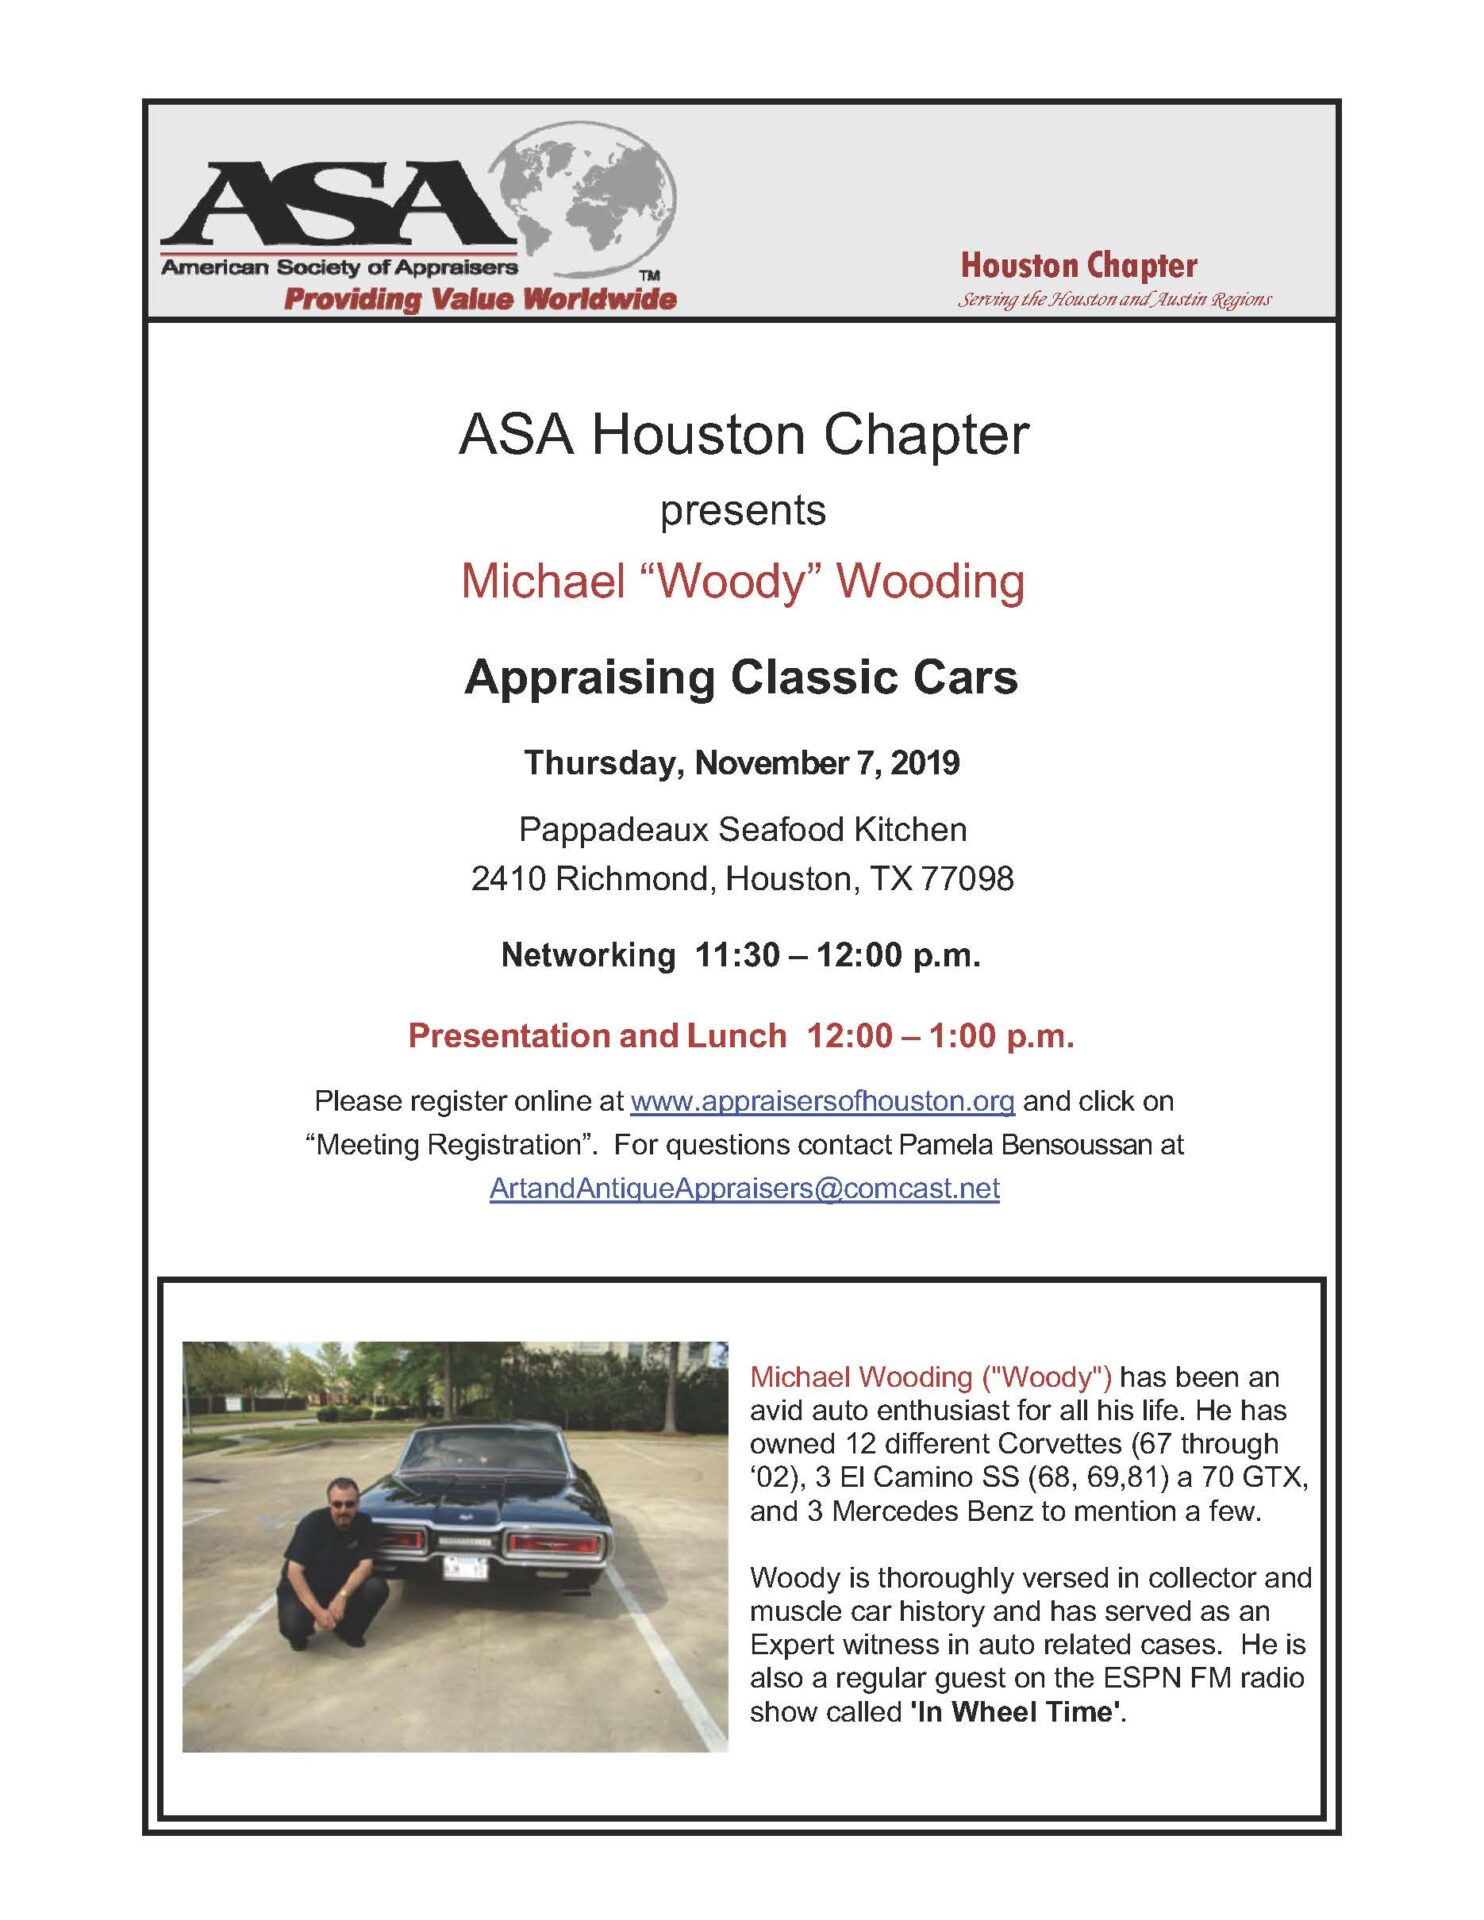 A meeting about appraising classic cars